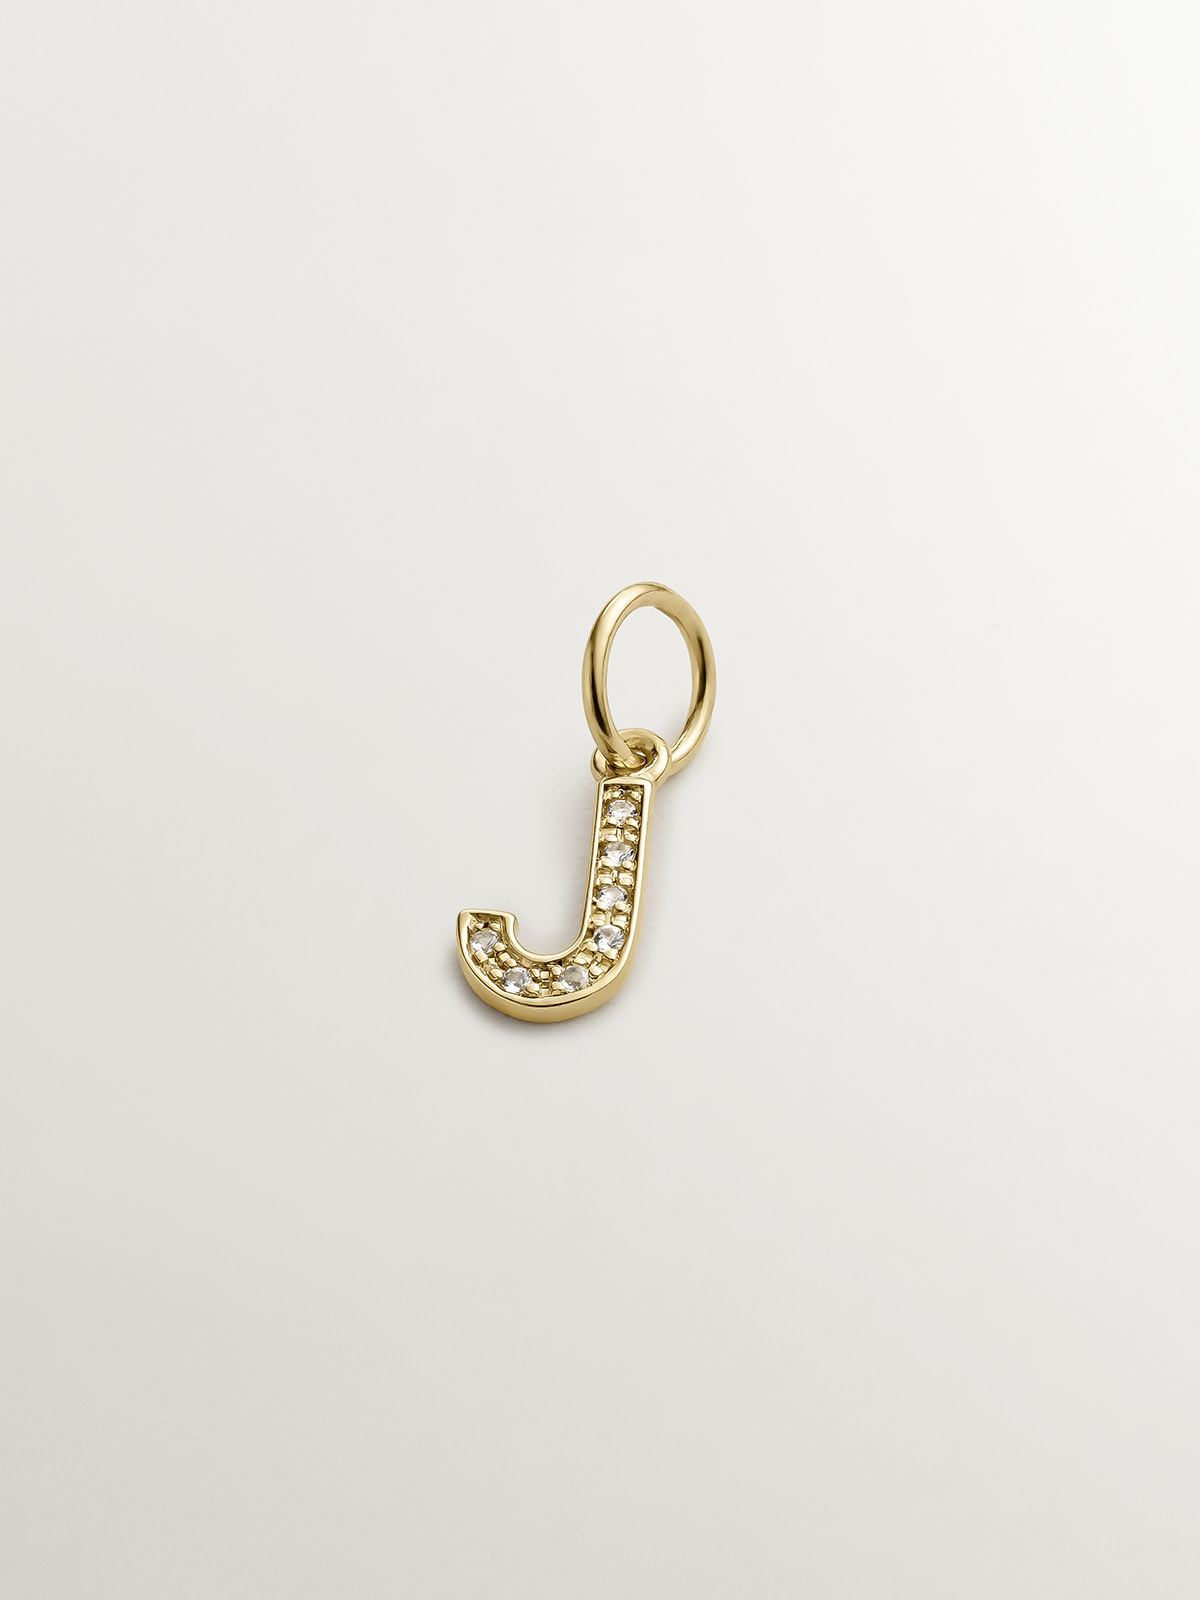 925 Sterling Silver Charm, 18K Yellow Gold Plated with White Topaz Initial J.